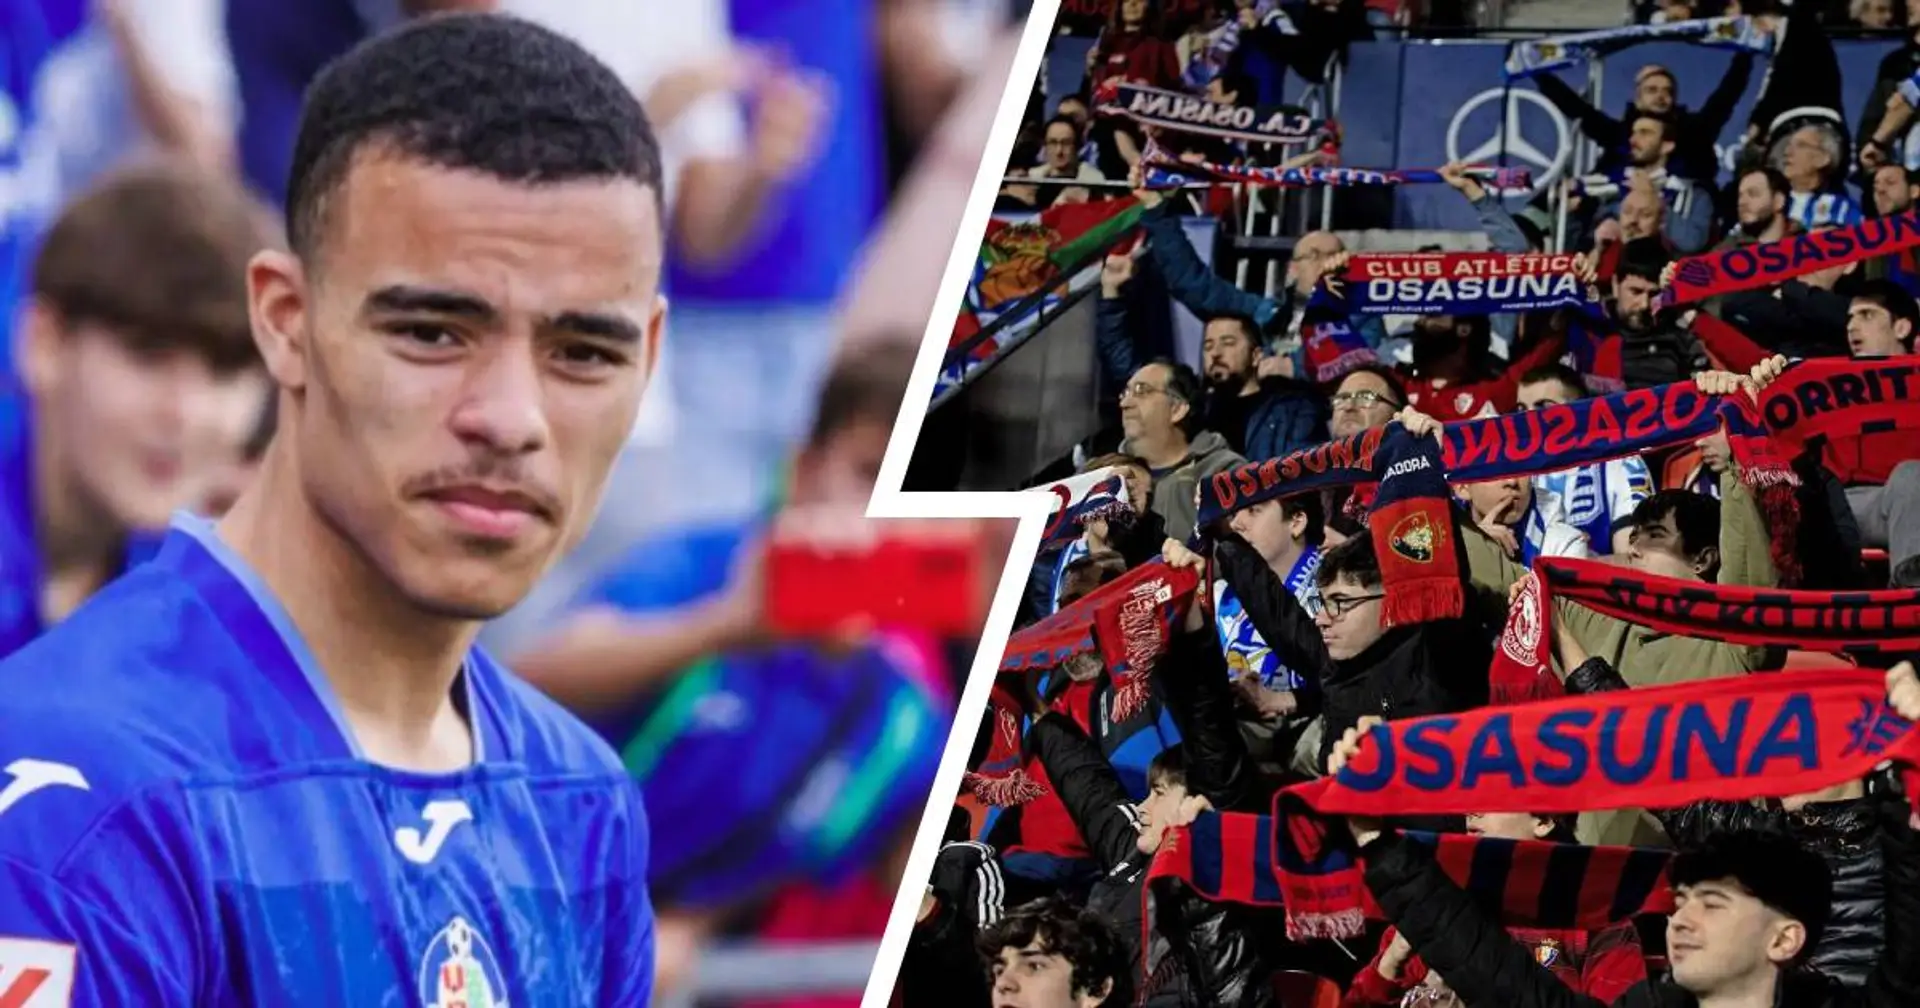 Osasuna fans chant 'Greenwood die', Getafe supporters react furiously